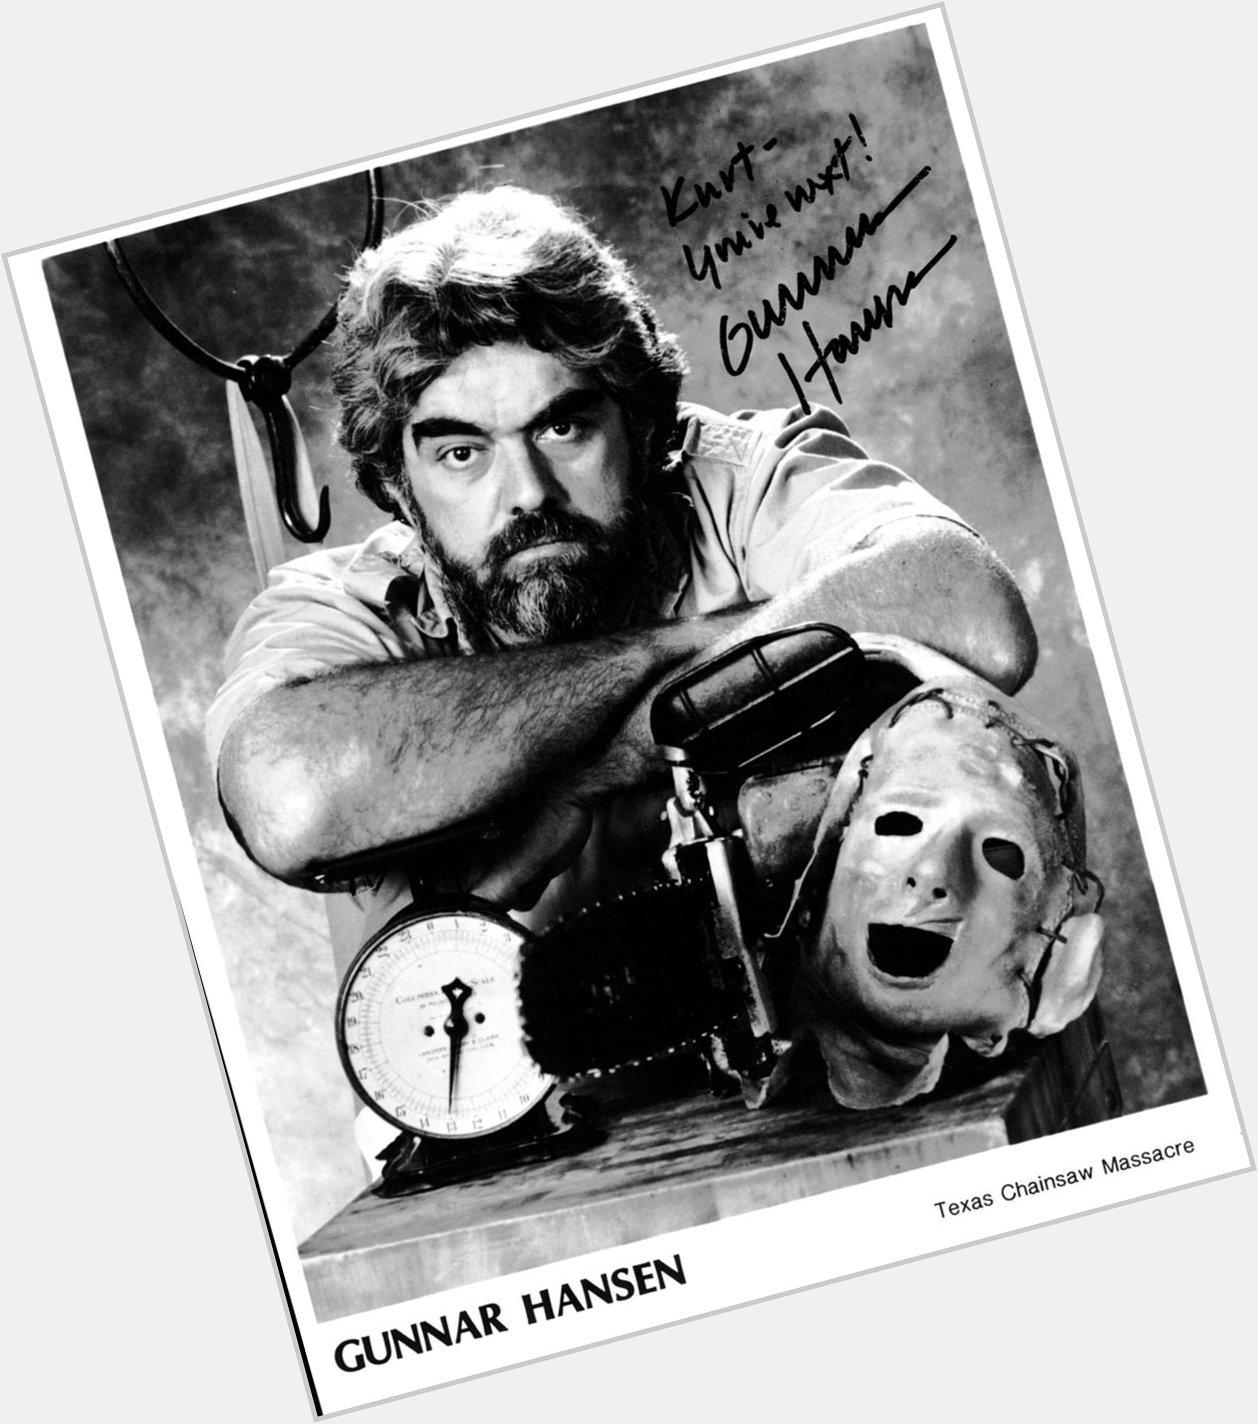 Happy birthday to the one and only, GUNNAR HANSEN! (and to Leatherface too, I guess) 